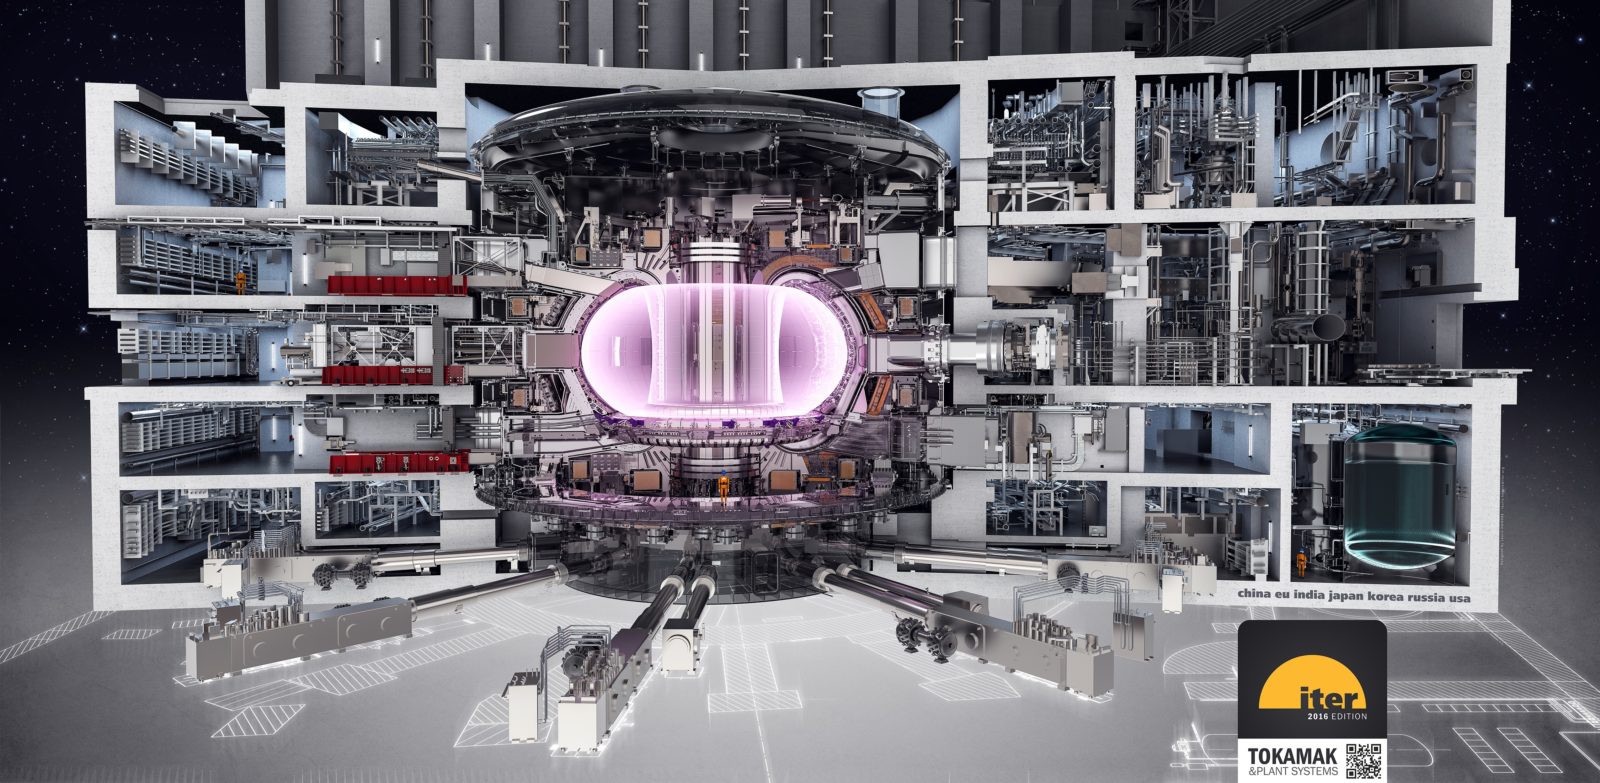 ITER TOKAMAK AND PLANT SYSTEMS, 2016